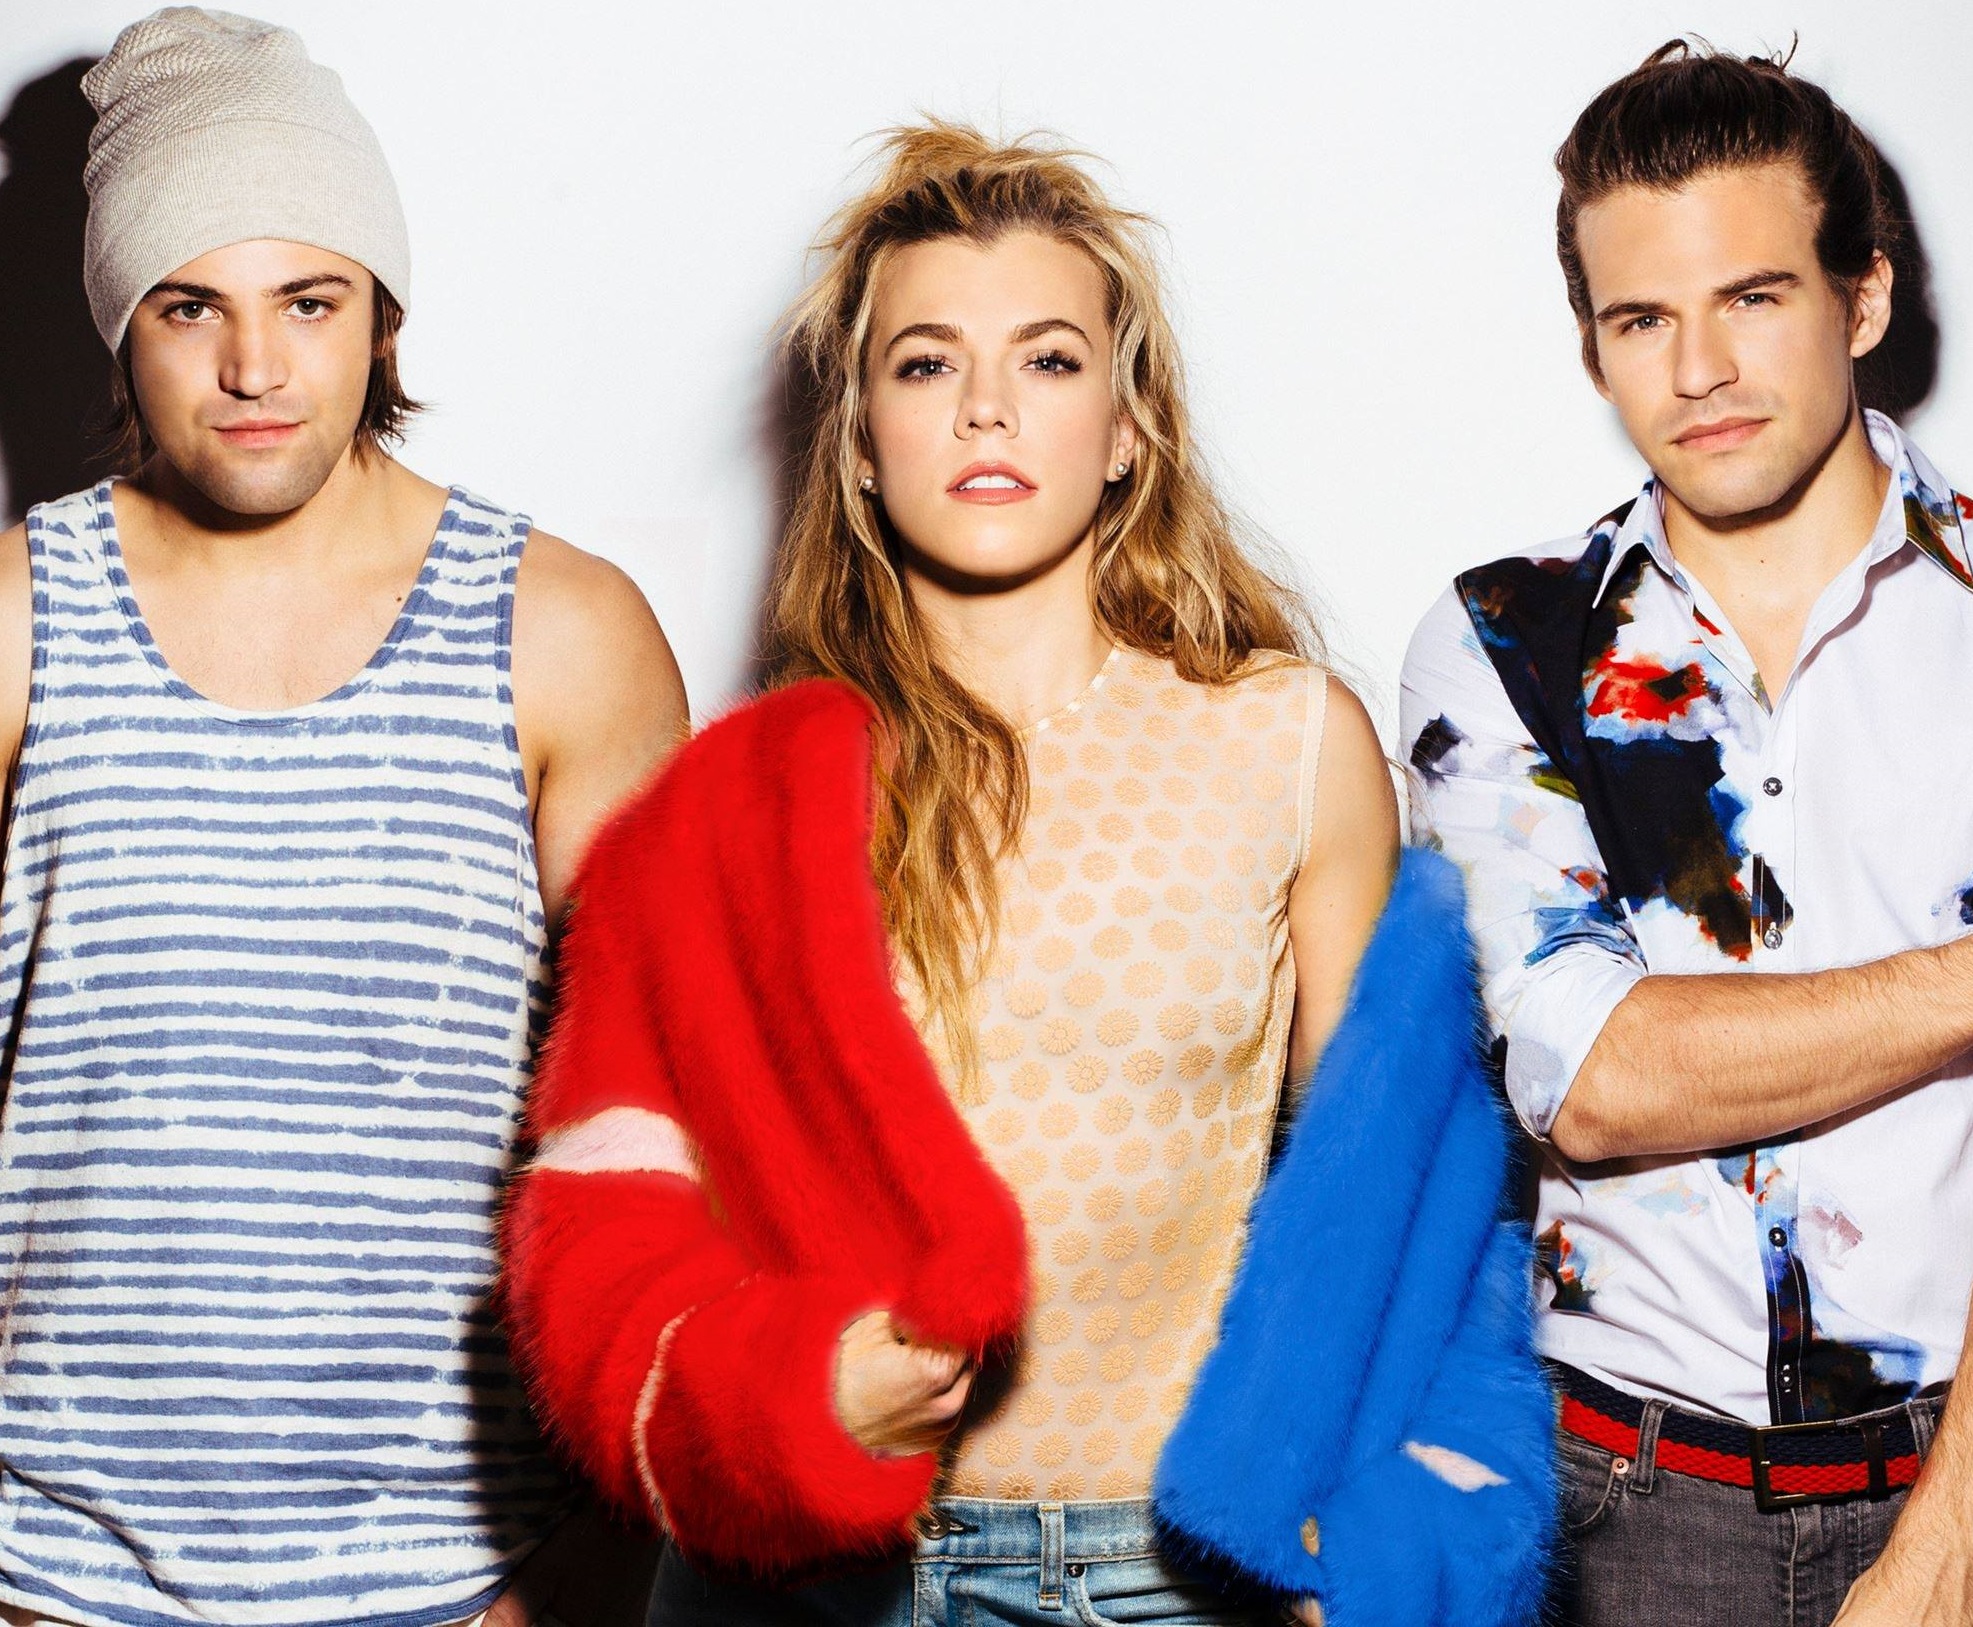 Pressroom THE BAND PERRY WILL “LIVE FOREVER” AT THE 2016 OLYMPICS.